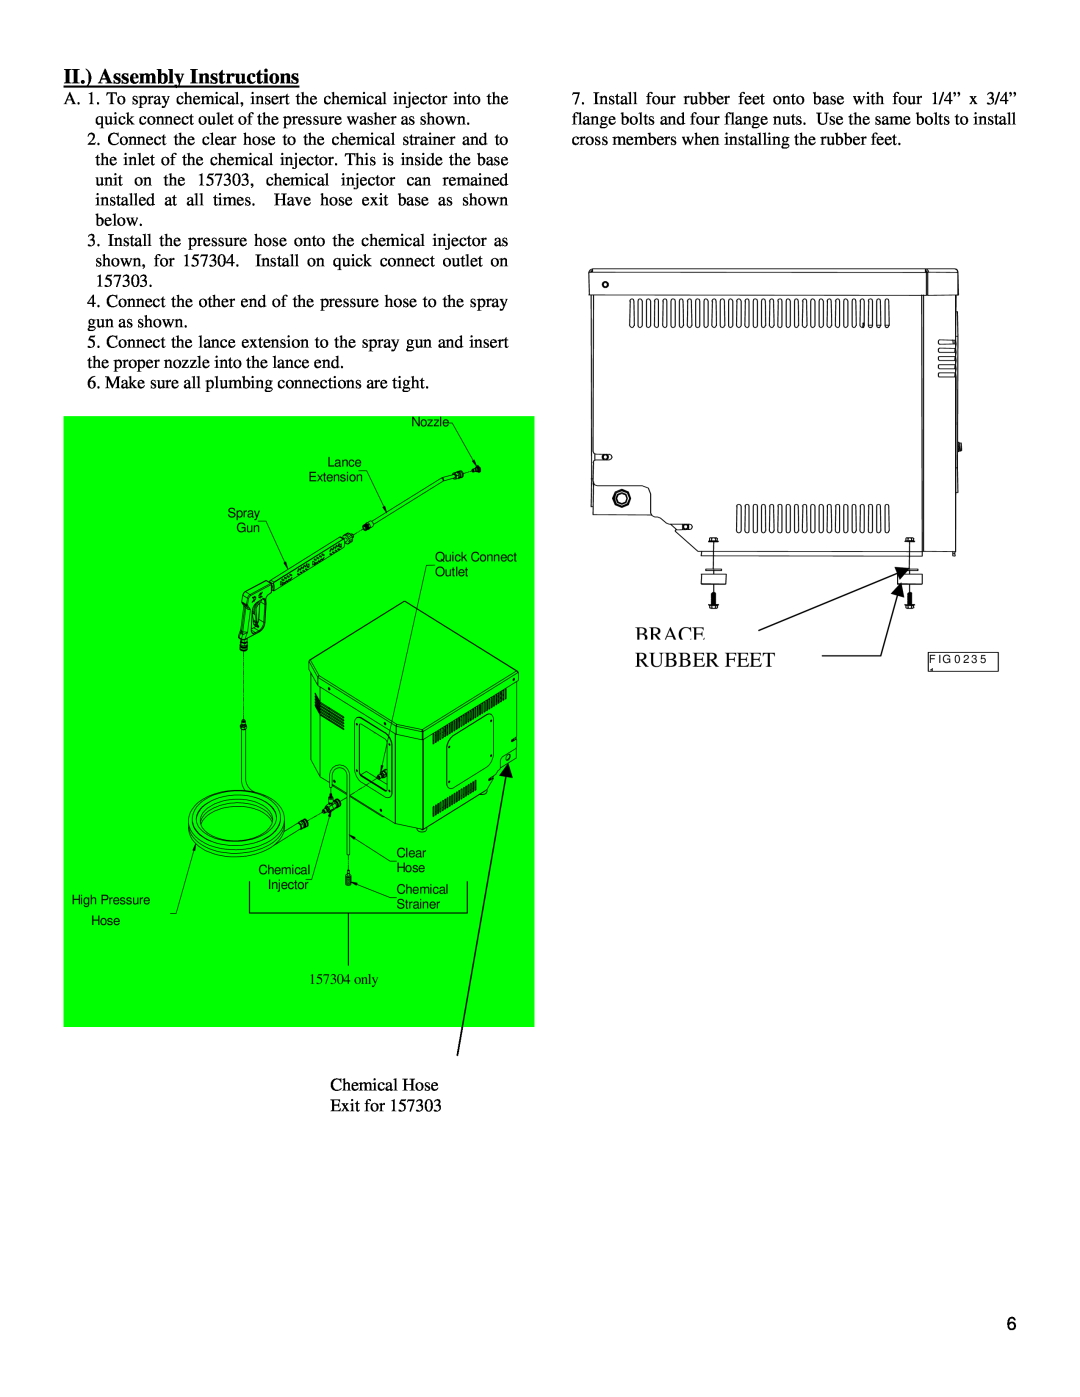 North Star M157304E specifications II. Assembly Instructions, BRACE RUBBER FEETF IG 0 2 3 